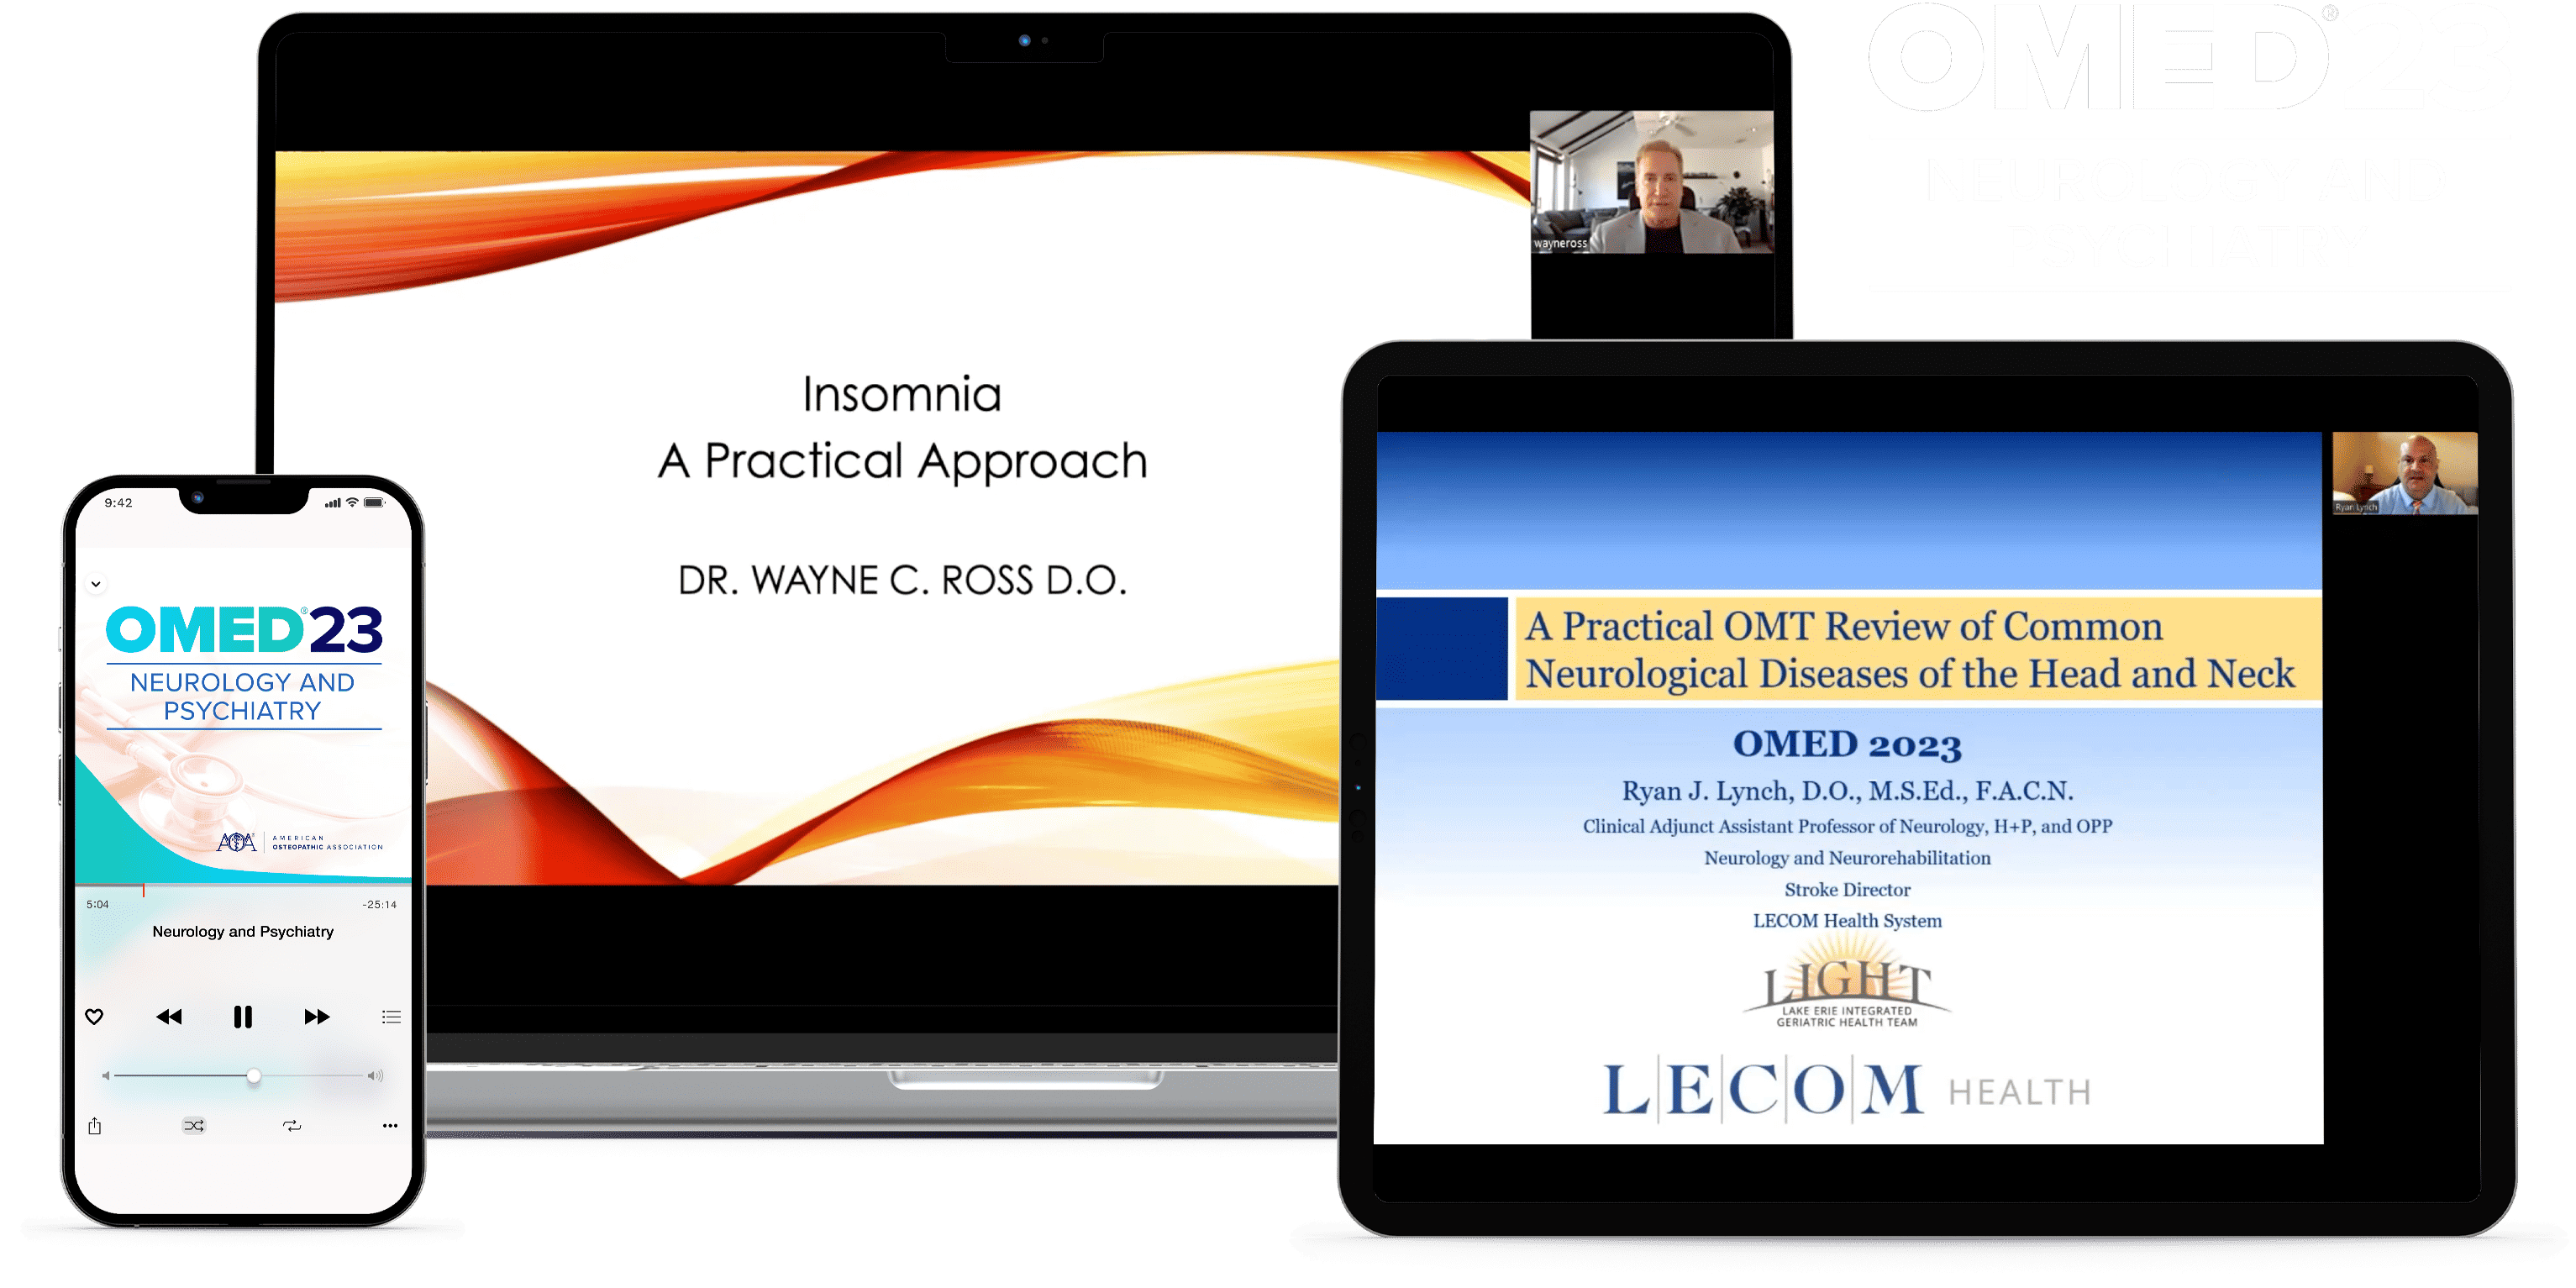 Laptop, tablet, and phone with OMED 2023 - Neurology and Psychiatry course on screen